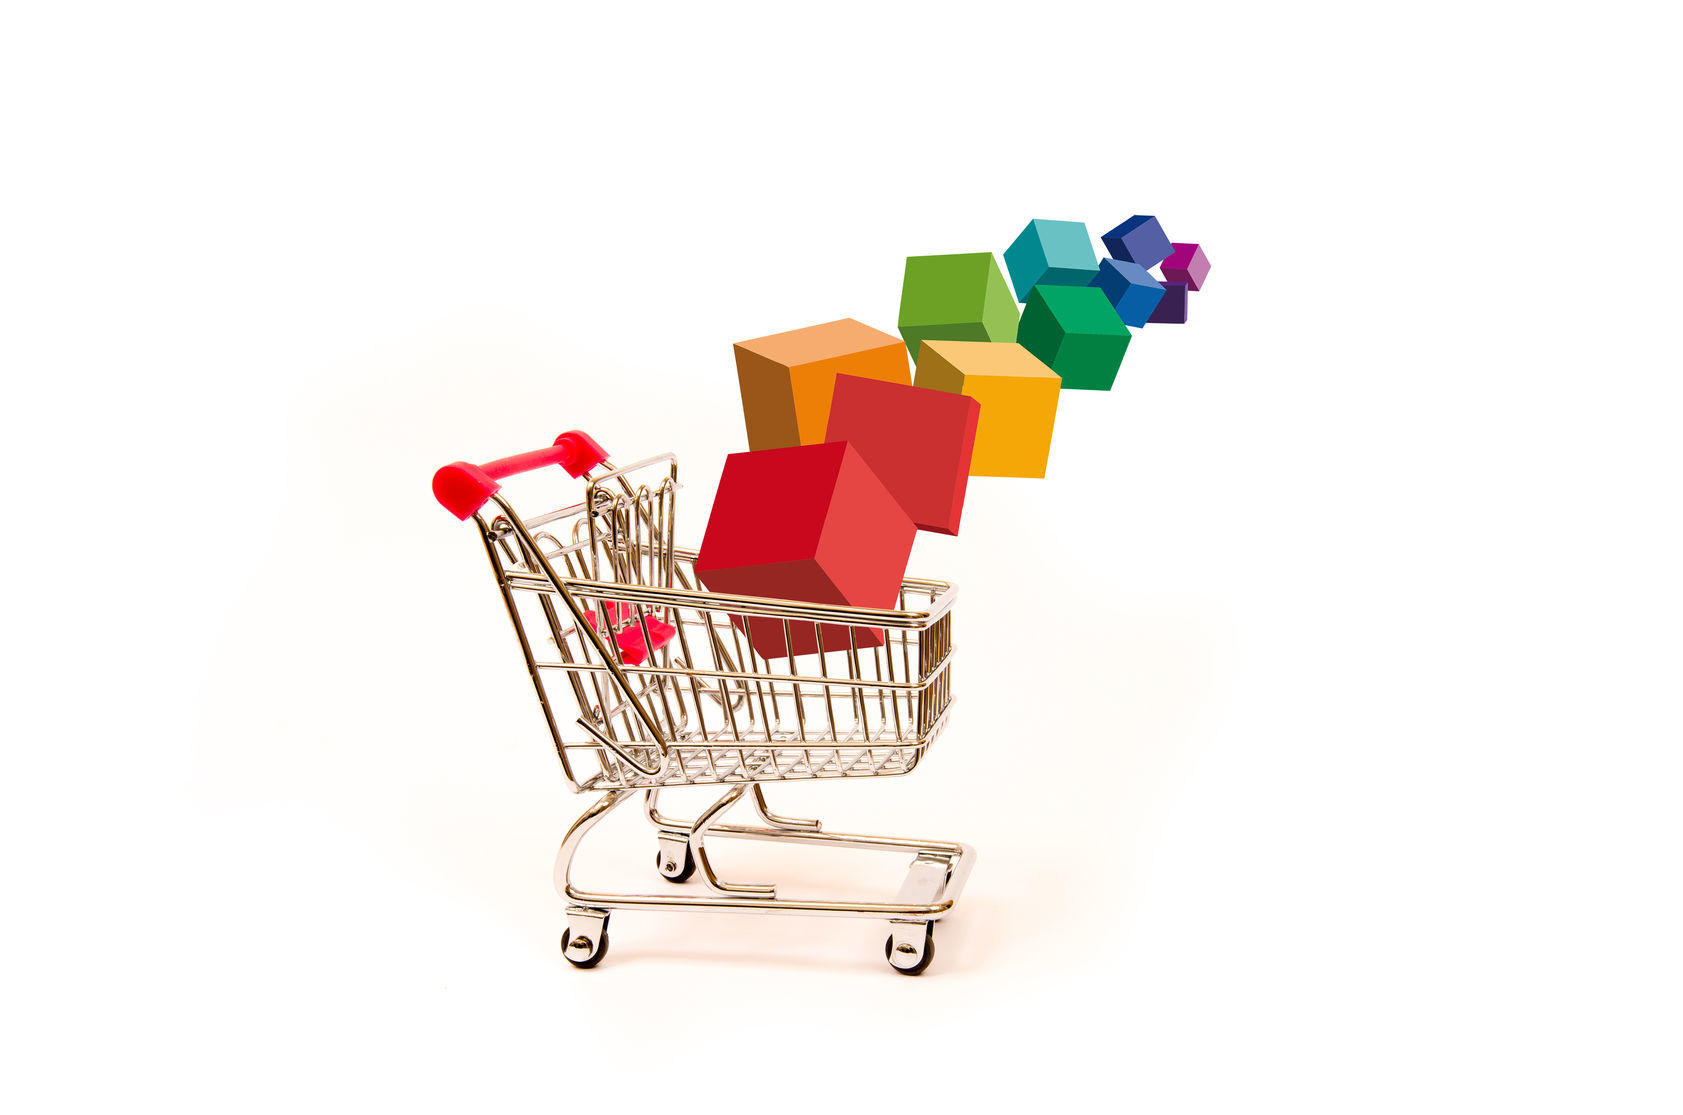 64061544 - conceptual vision of purchases, shopping cart with packs